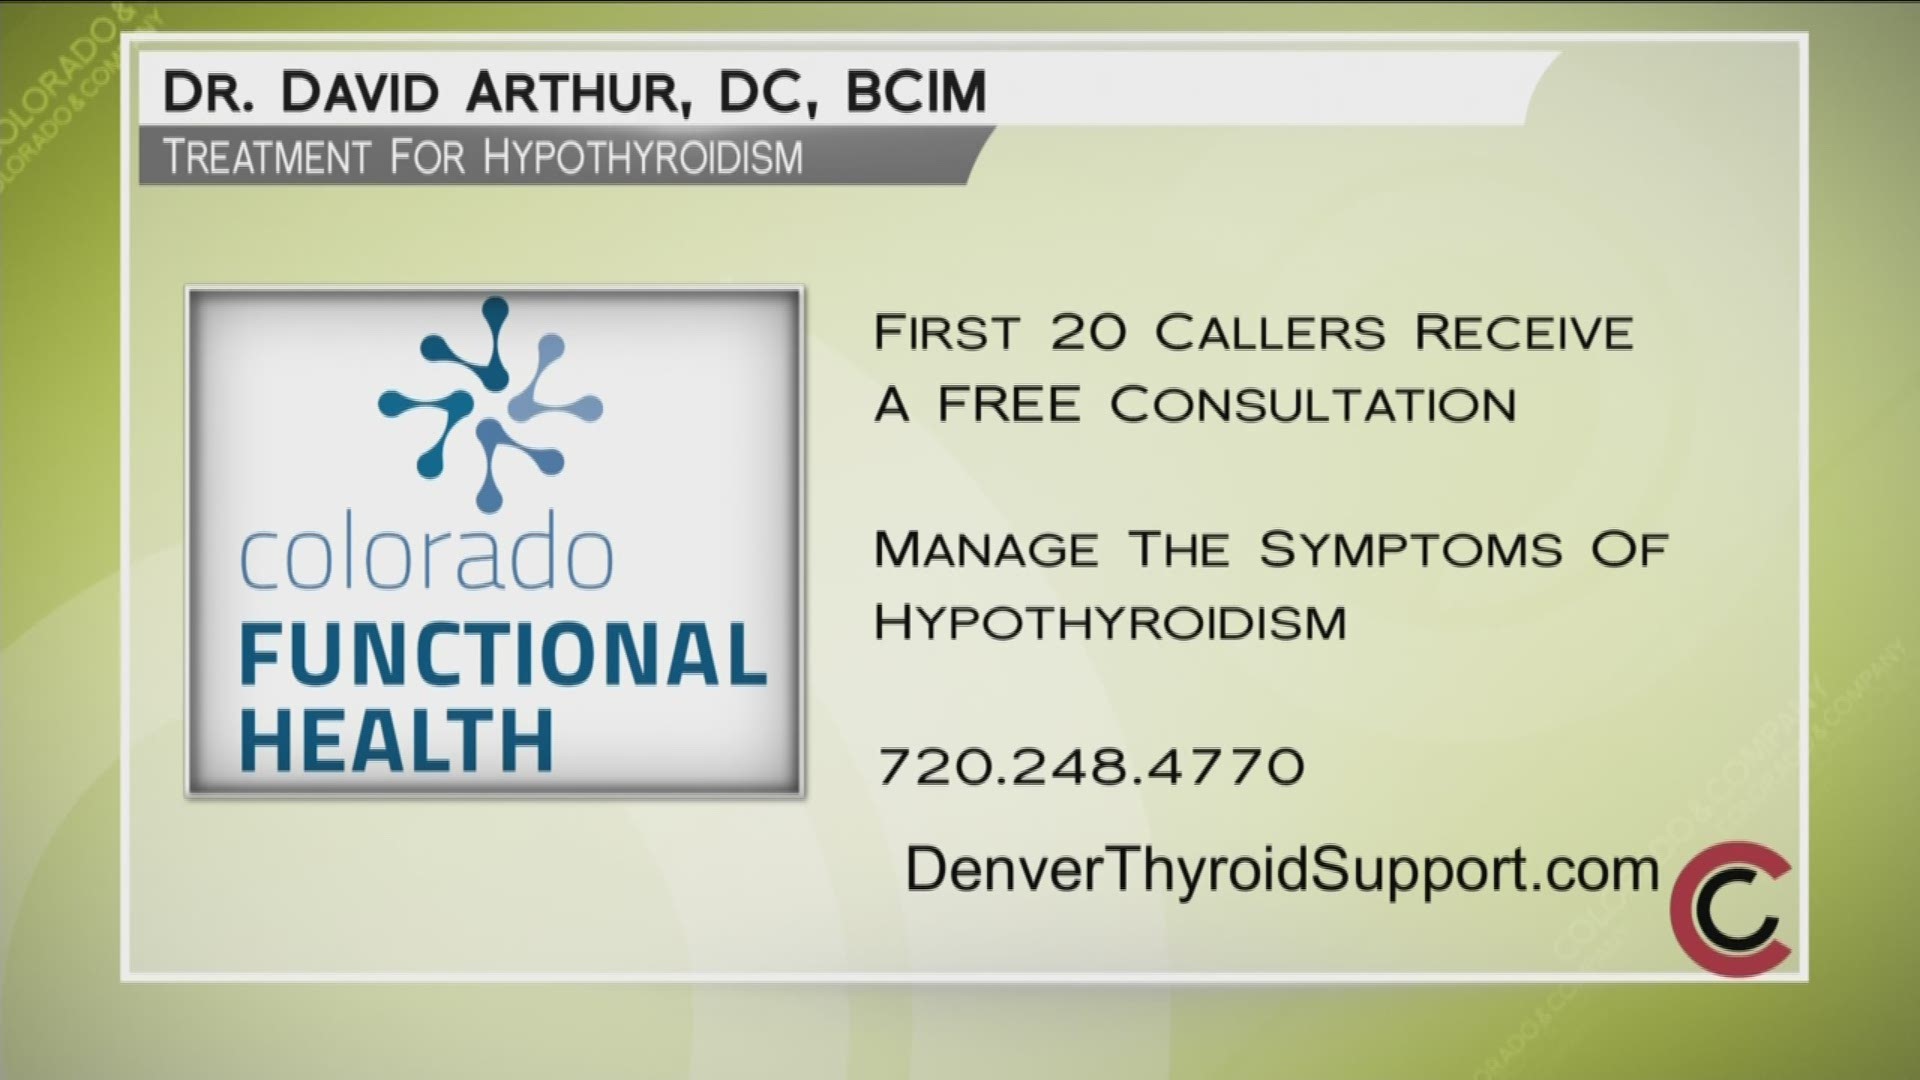 Dr. Arthur has reserved 20 free initial consultations for the first 20 callers. Mention Colorado and Company when you call 720.248.4770. The offer is for first-time callers who have been previously diagnosed, and are taking medication for low thyroid. Learn more at www.DenverThyroidSupport.com. 
THIS INTERVIEW HAS COMMERCIAL CONTENT. PRODUCTS AND SERVICES FEATURED APPEAR AS PAID ADVERTISING.